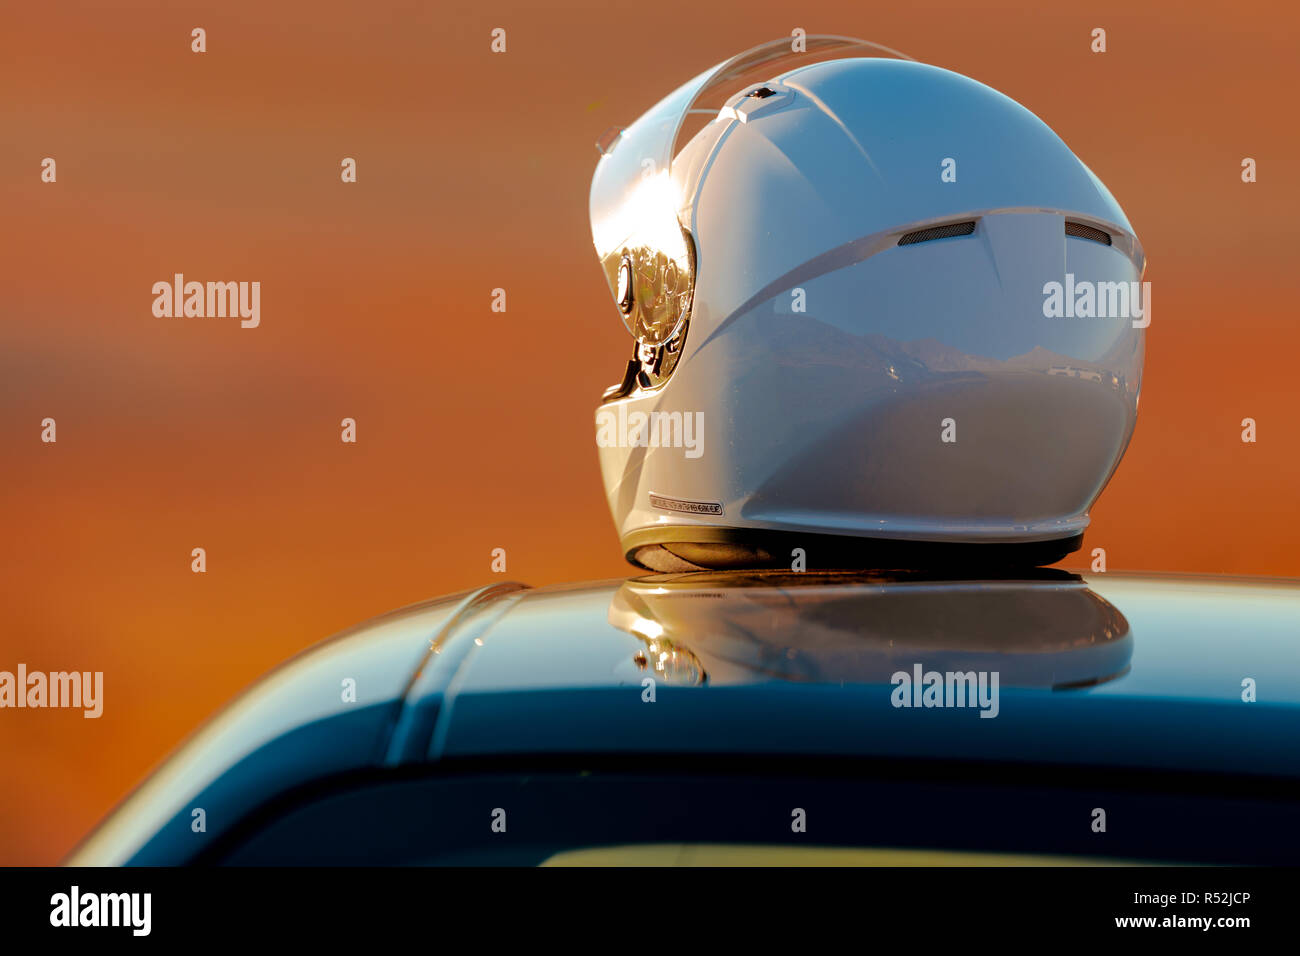 A Racing Helmet Sitting On Top Of A Car at the track In The Early Morning Sun Stock Photo